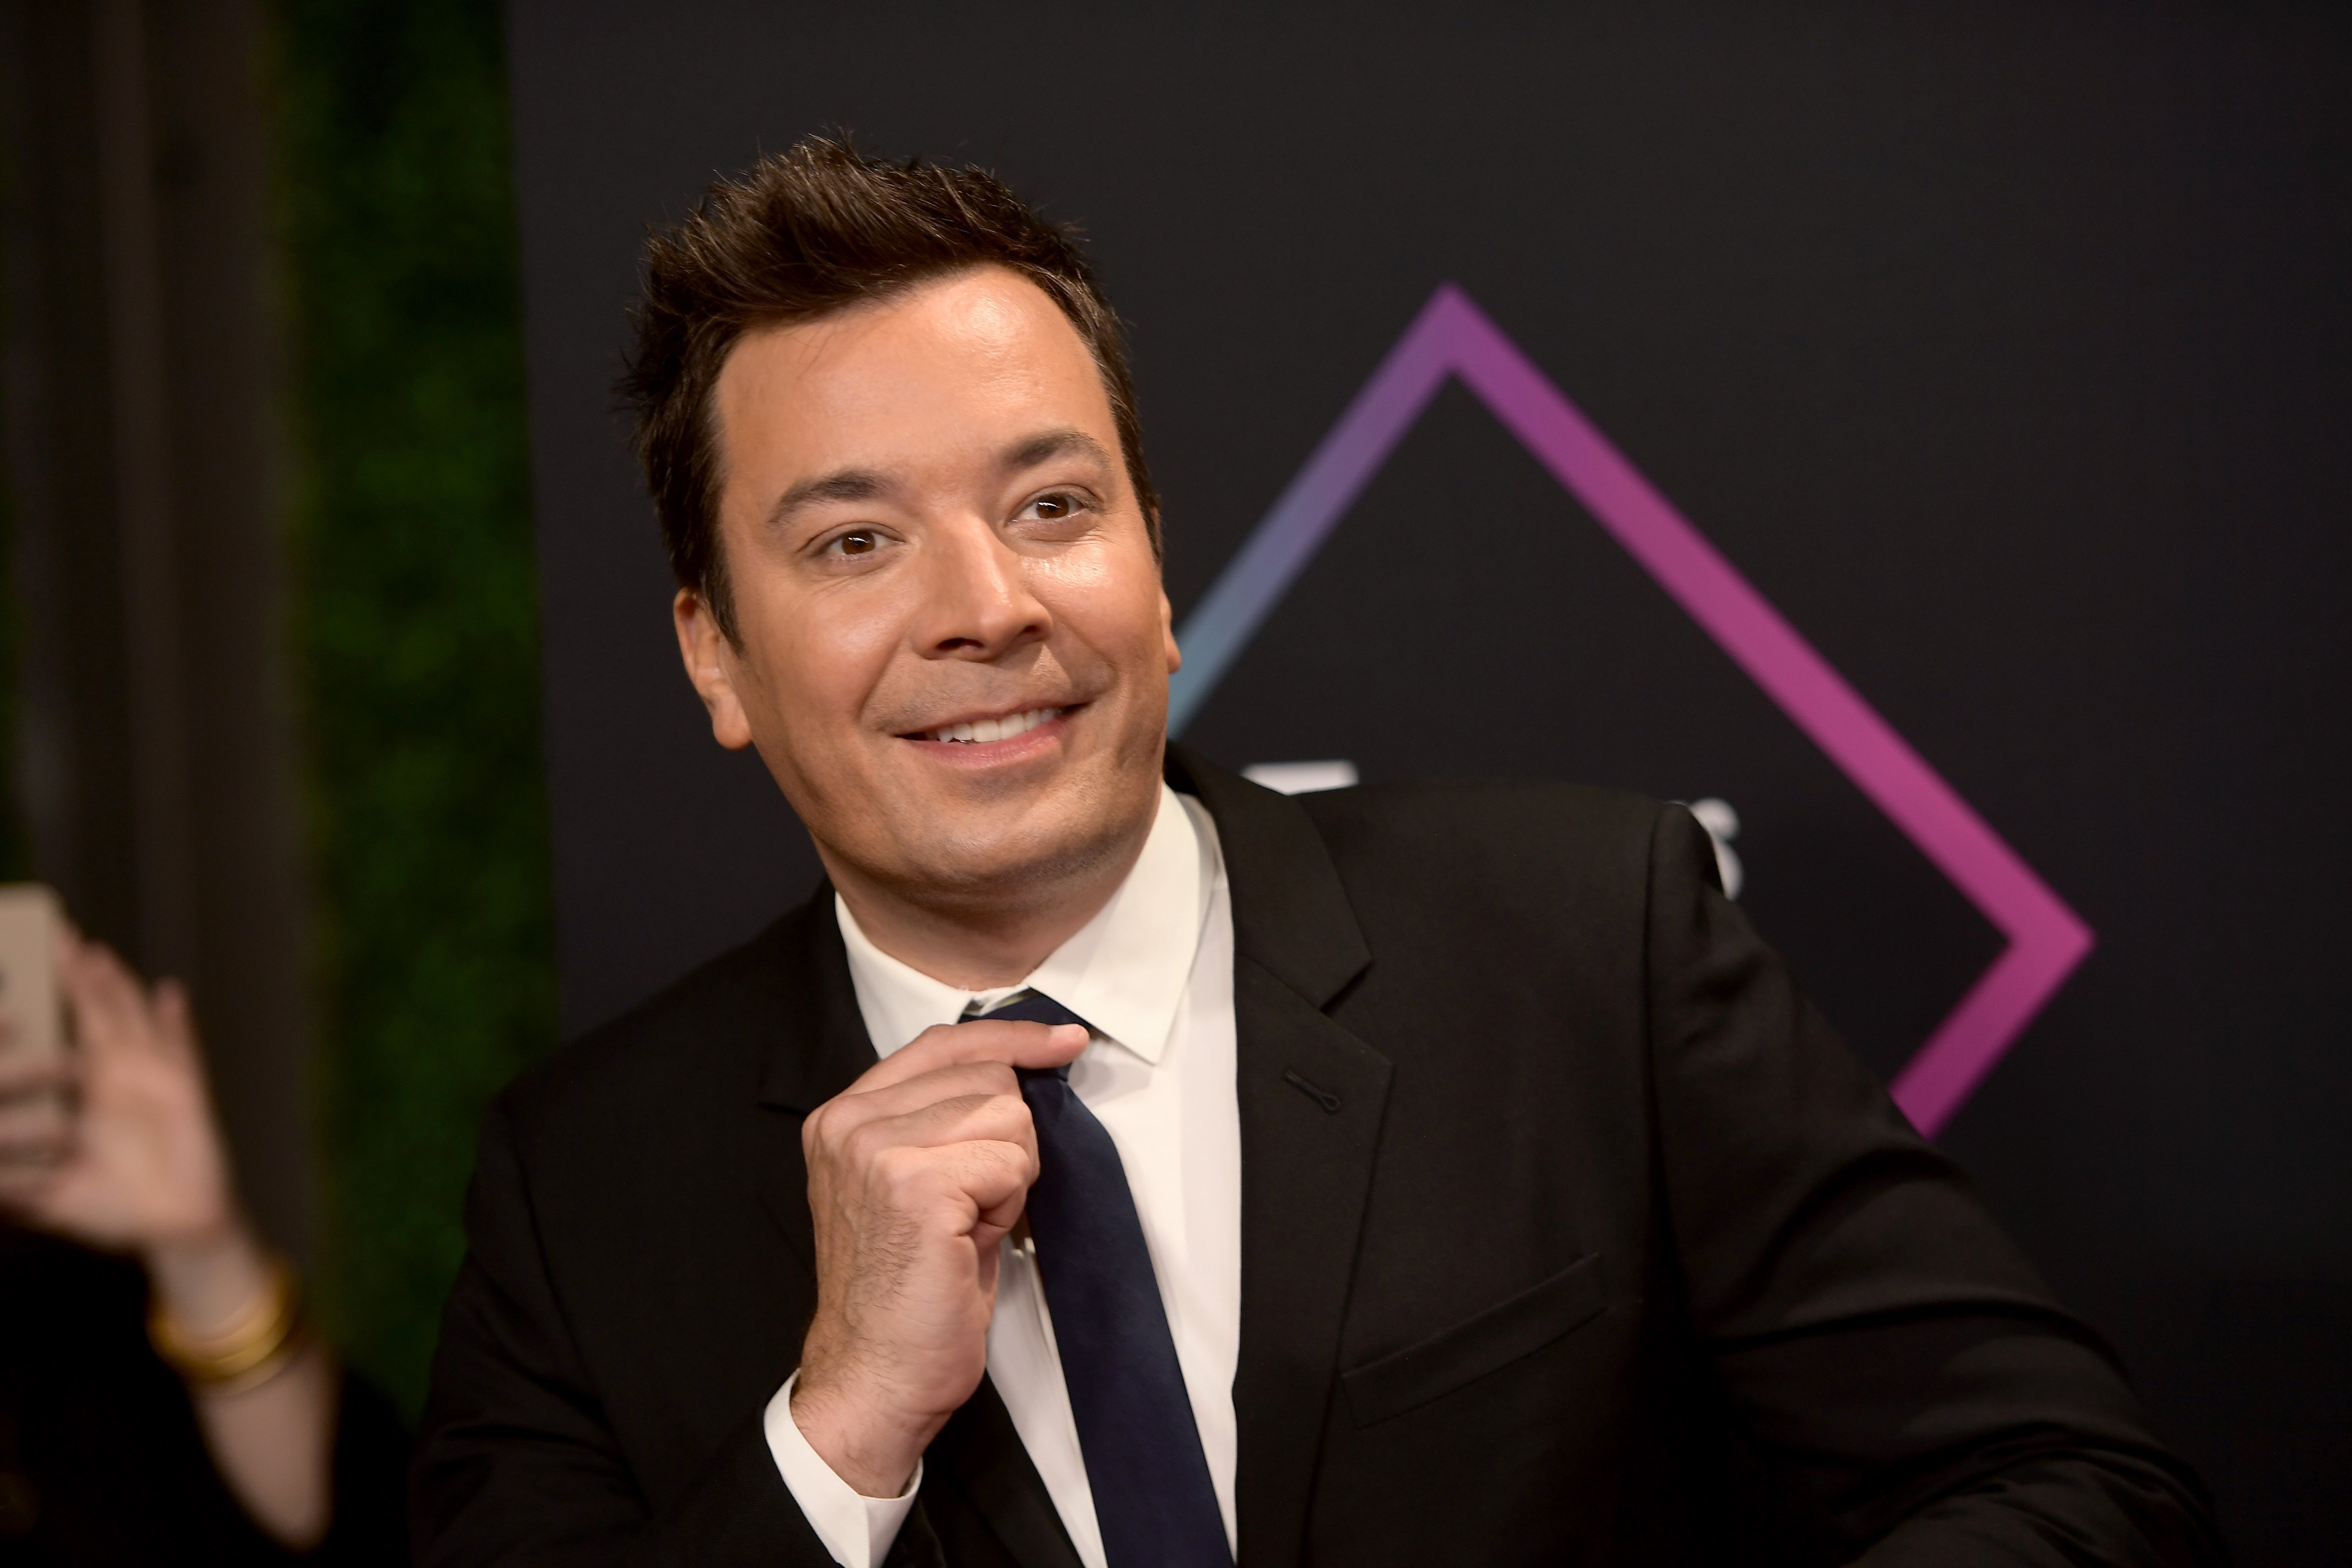 Jimmy Fallon attends the People's Choice Awards on November 11, 2018, in Santa Monica, California. | Source: Getty Images.